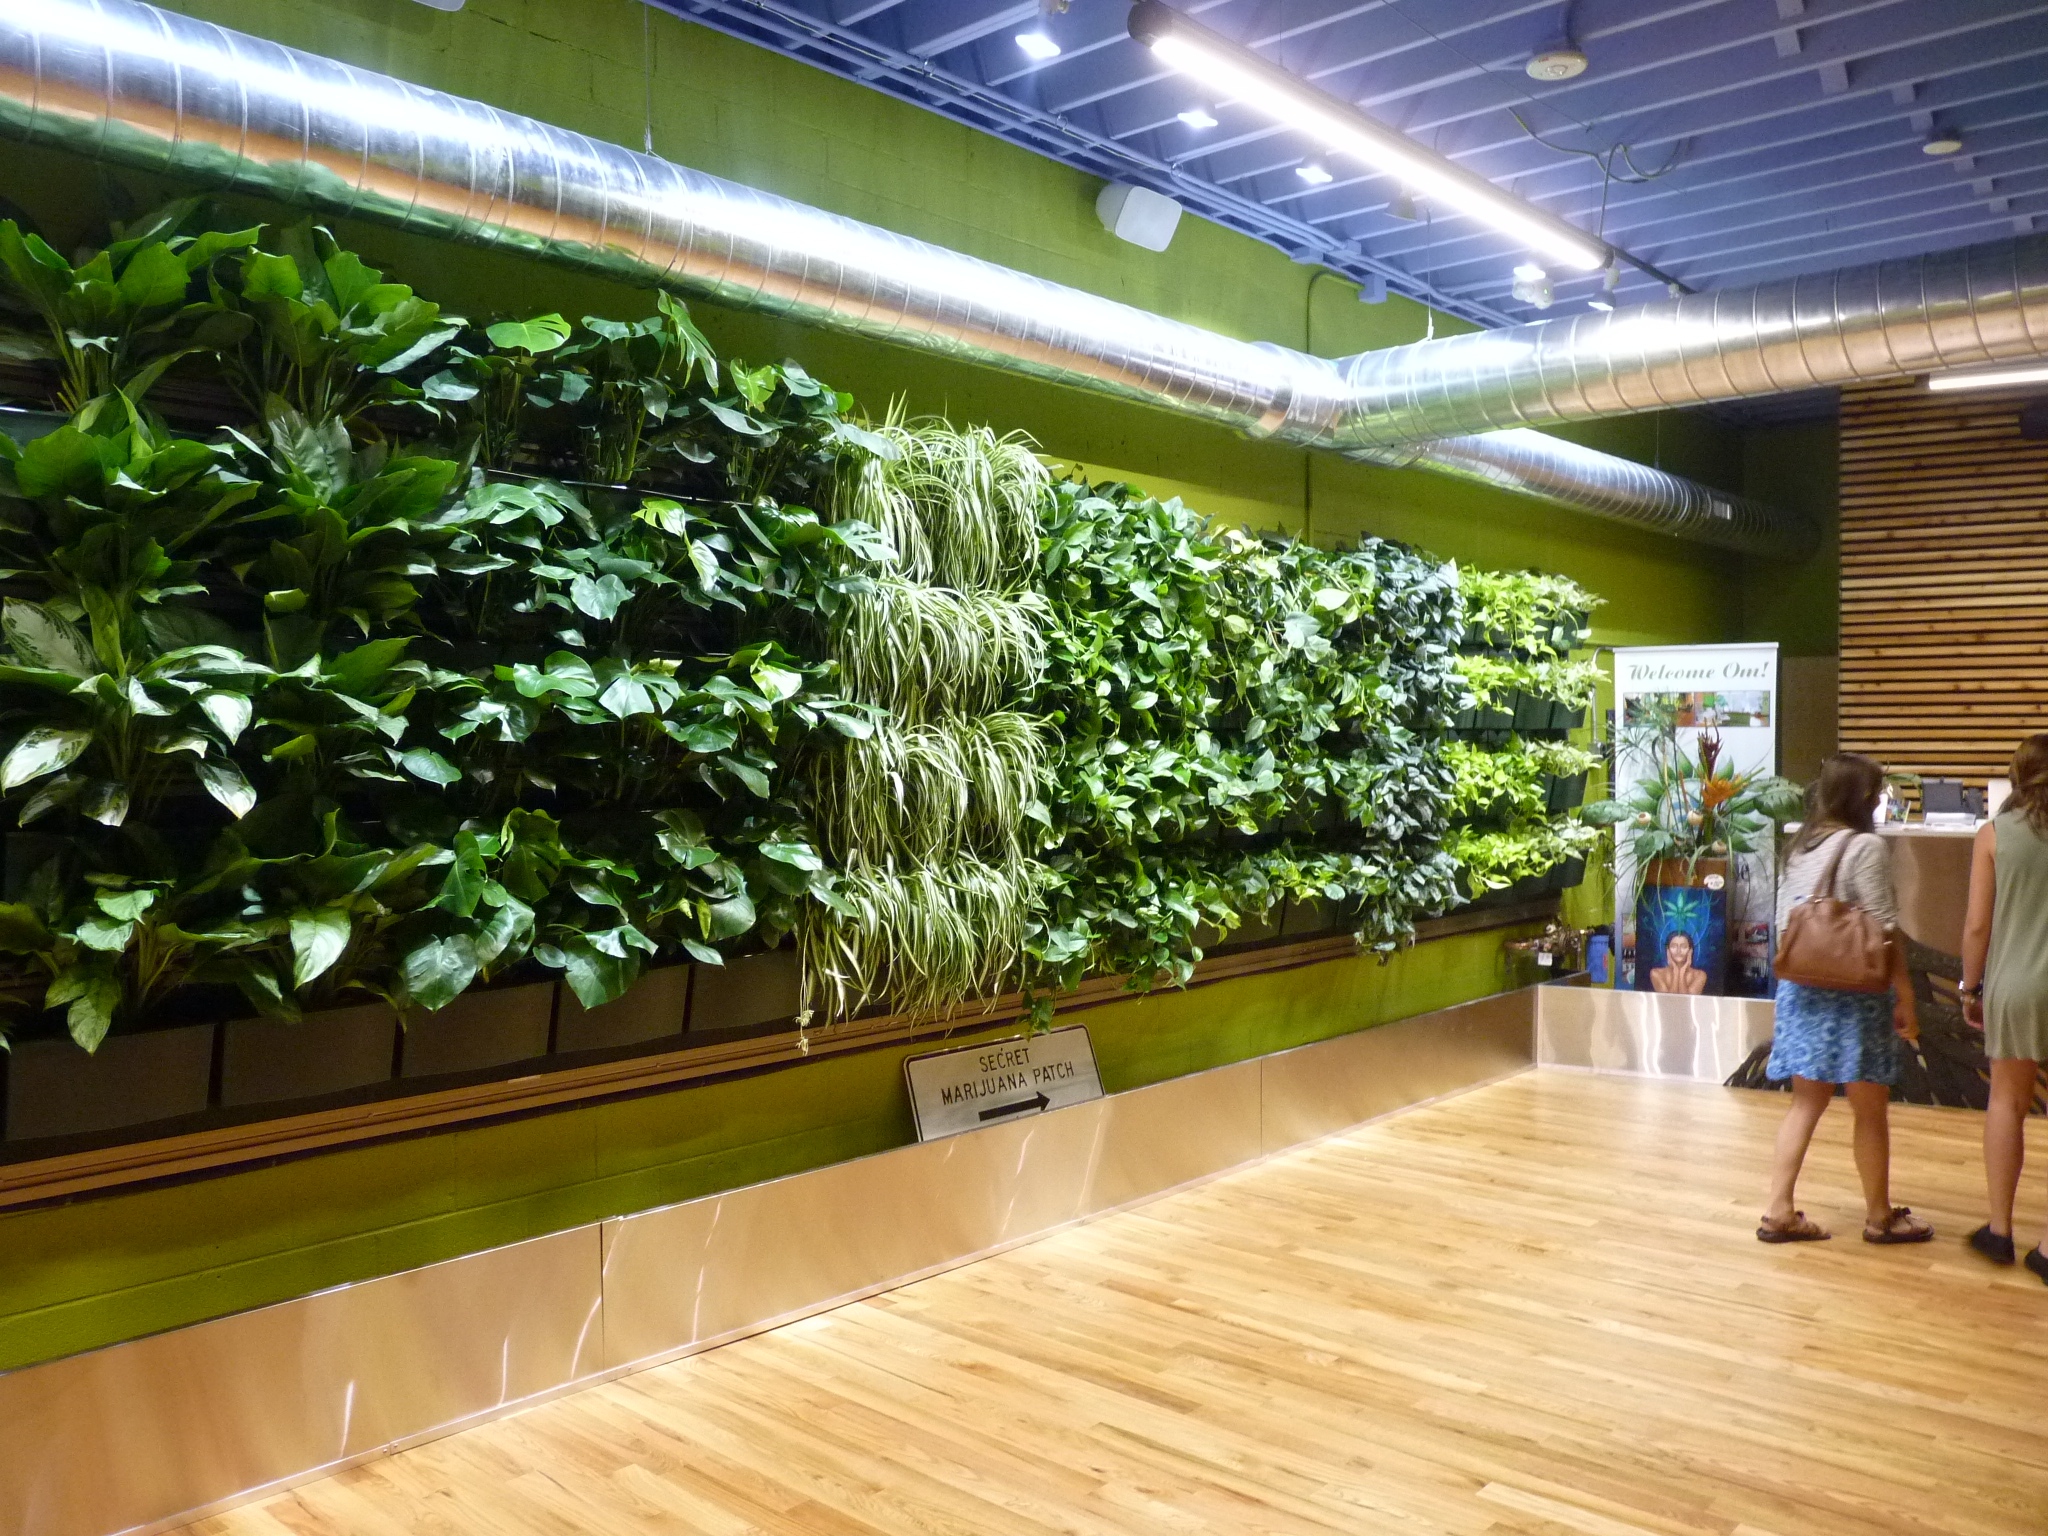 Beautiful living wall displayed at Mission Dispensaries (Om of Medicine) in Ann Arbor MI